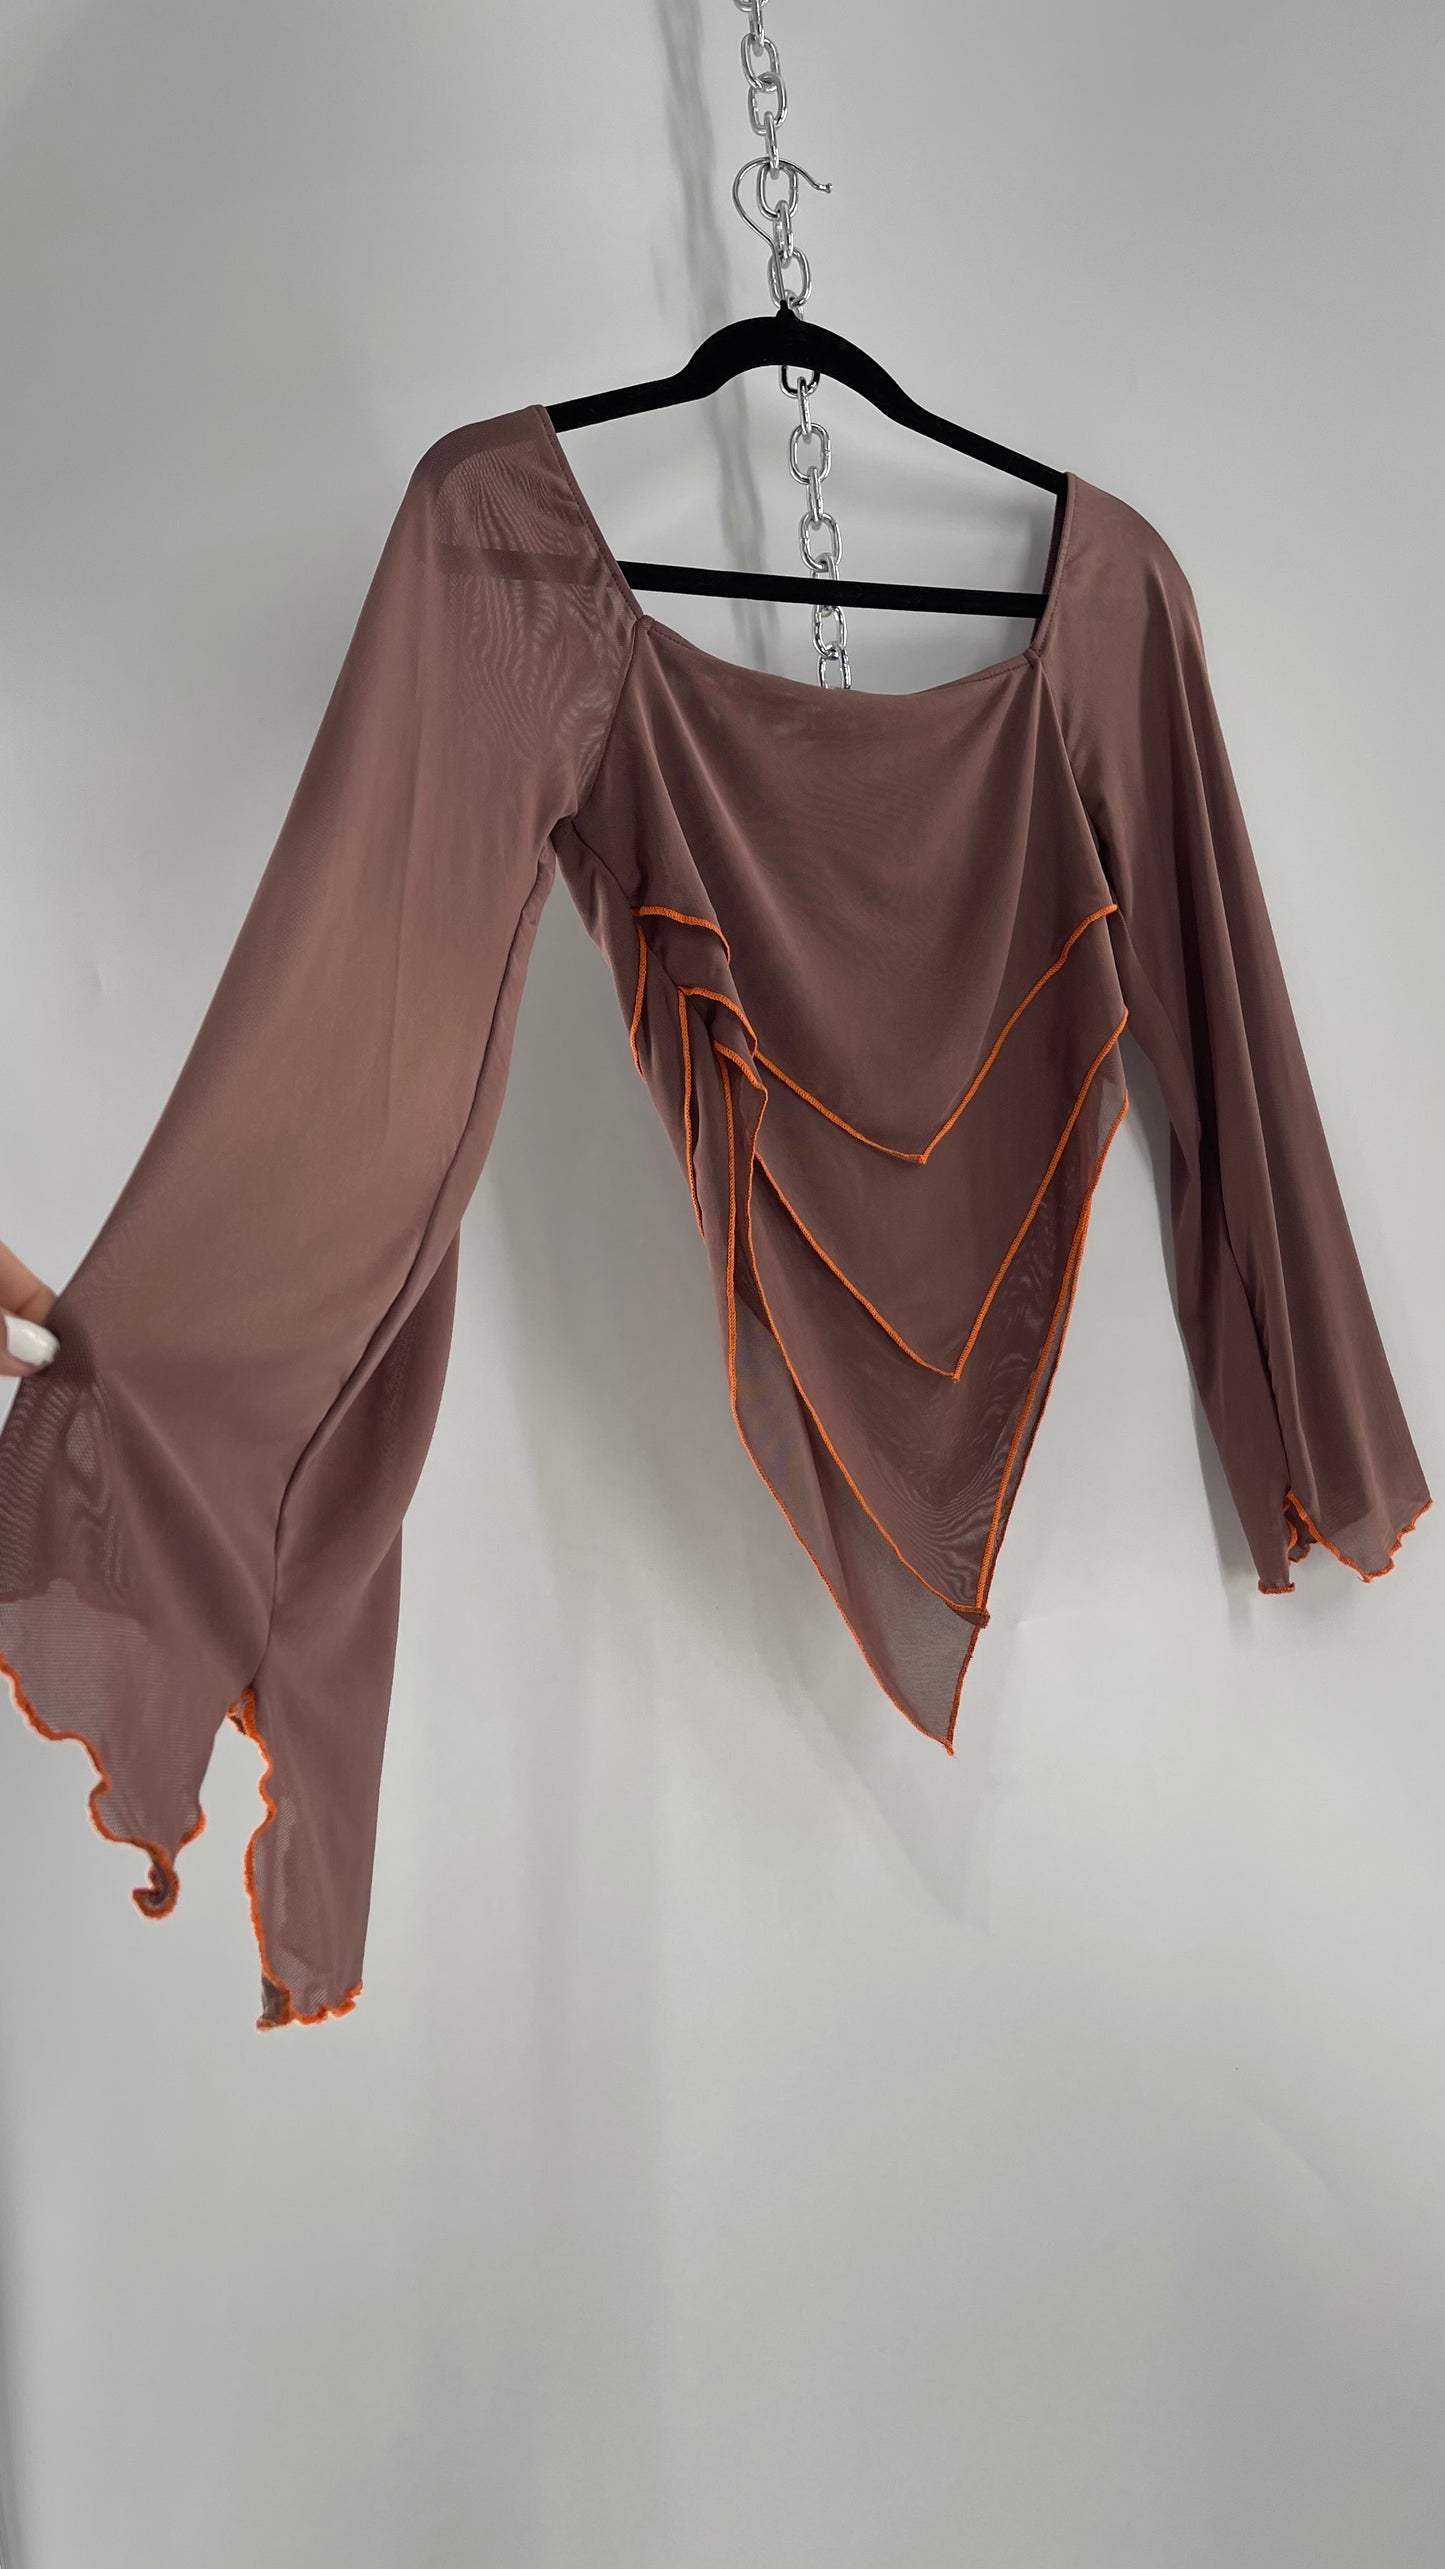 Fashion Nova Brown Mesh Pointed Hem Blouse with Bell Sleeves and Orange Contrast Stitch